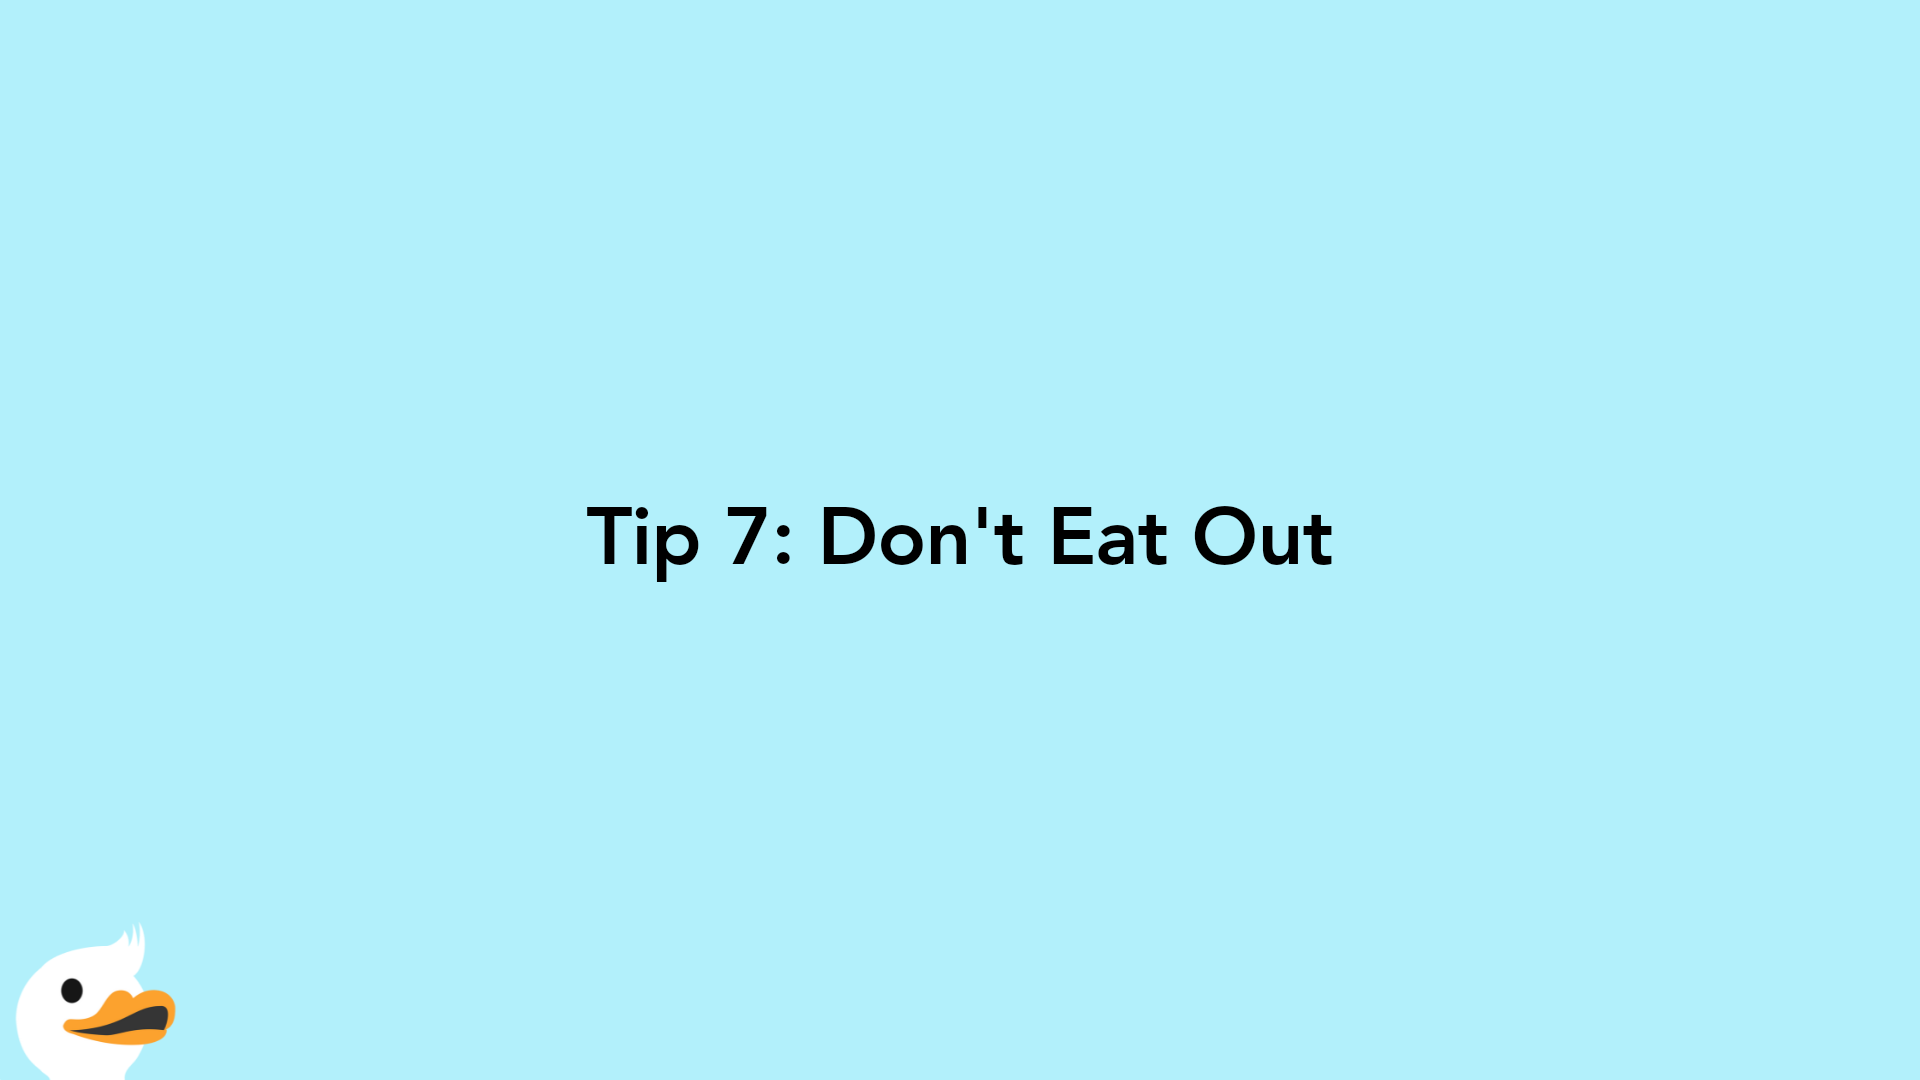 Tip 7: Don't Eat Out